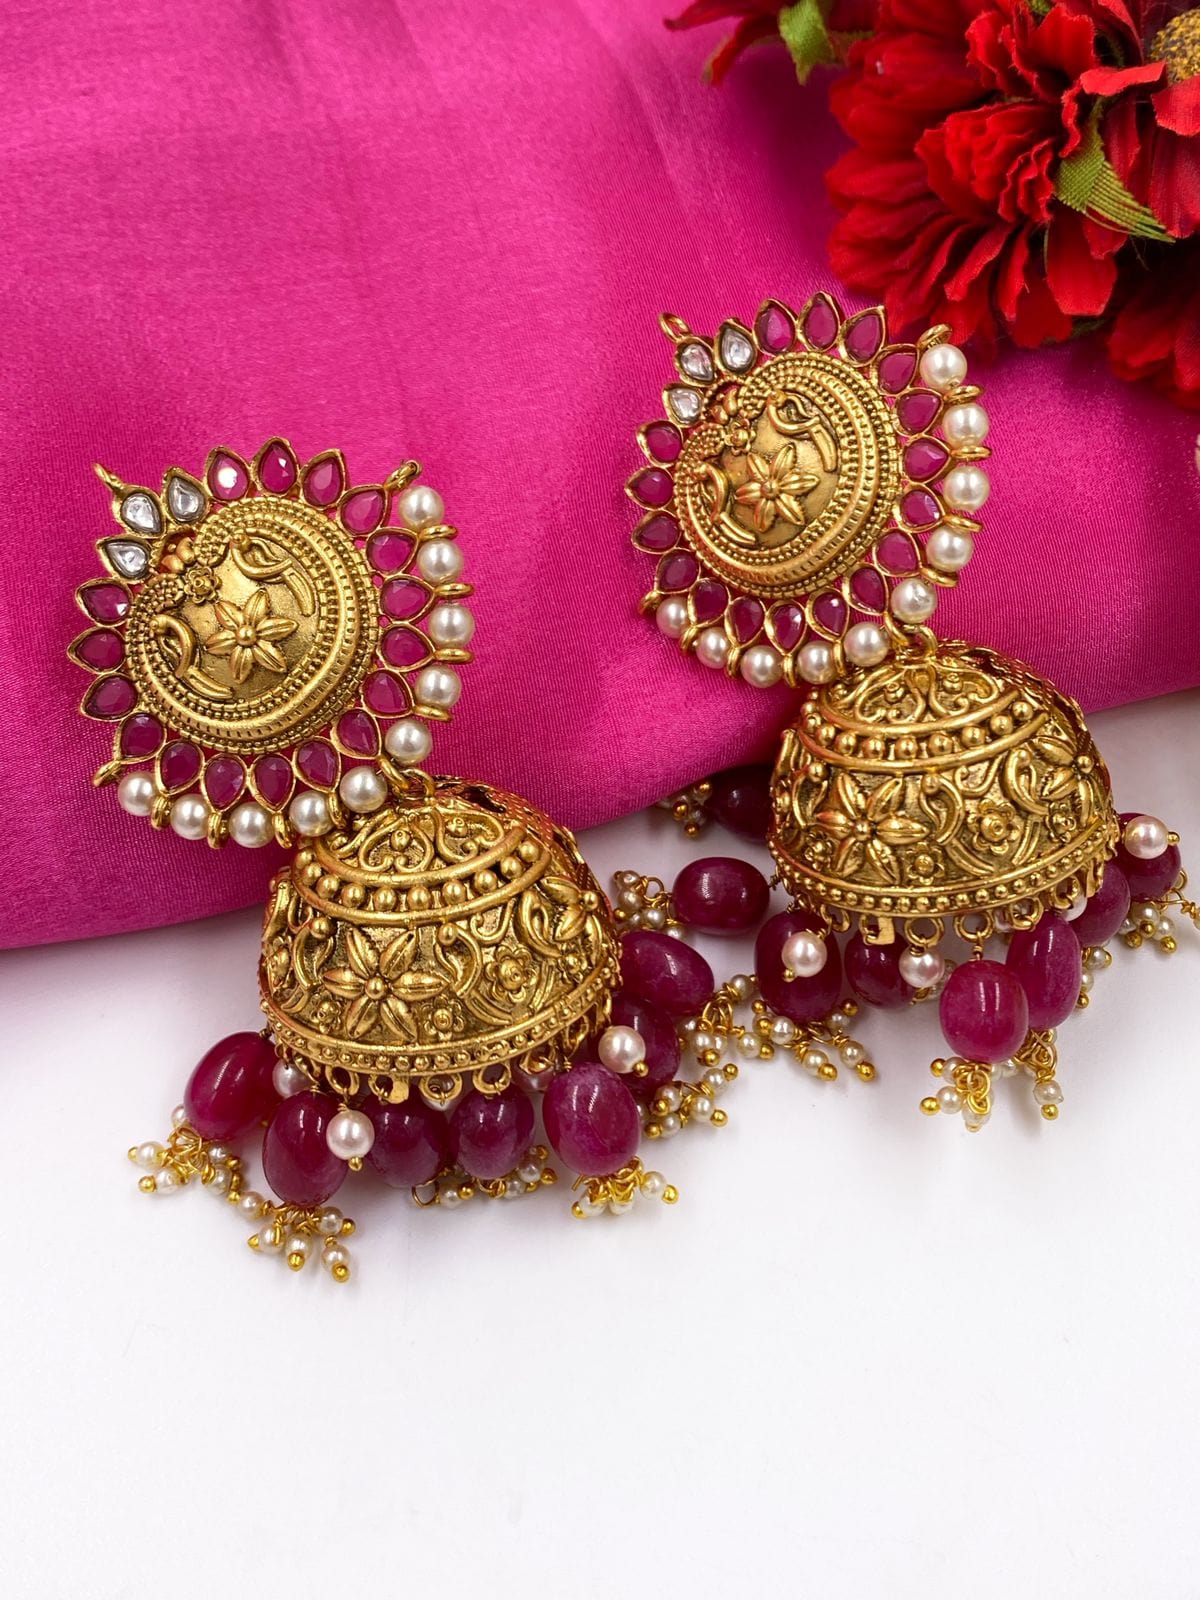 Traditional Gold Plated Exclusive Golden Jhumka For Ladies By Gehna Shop Jhumka earrings